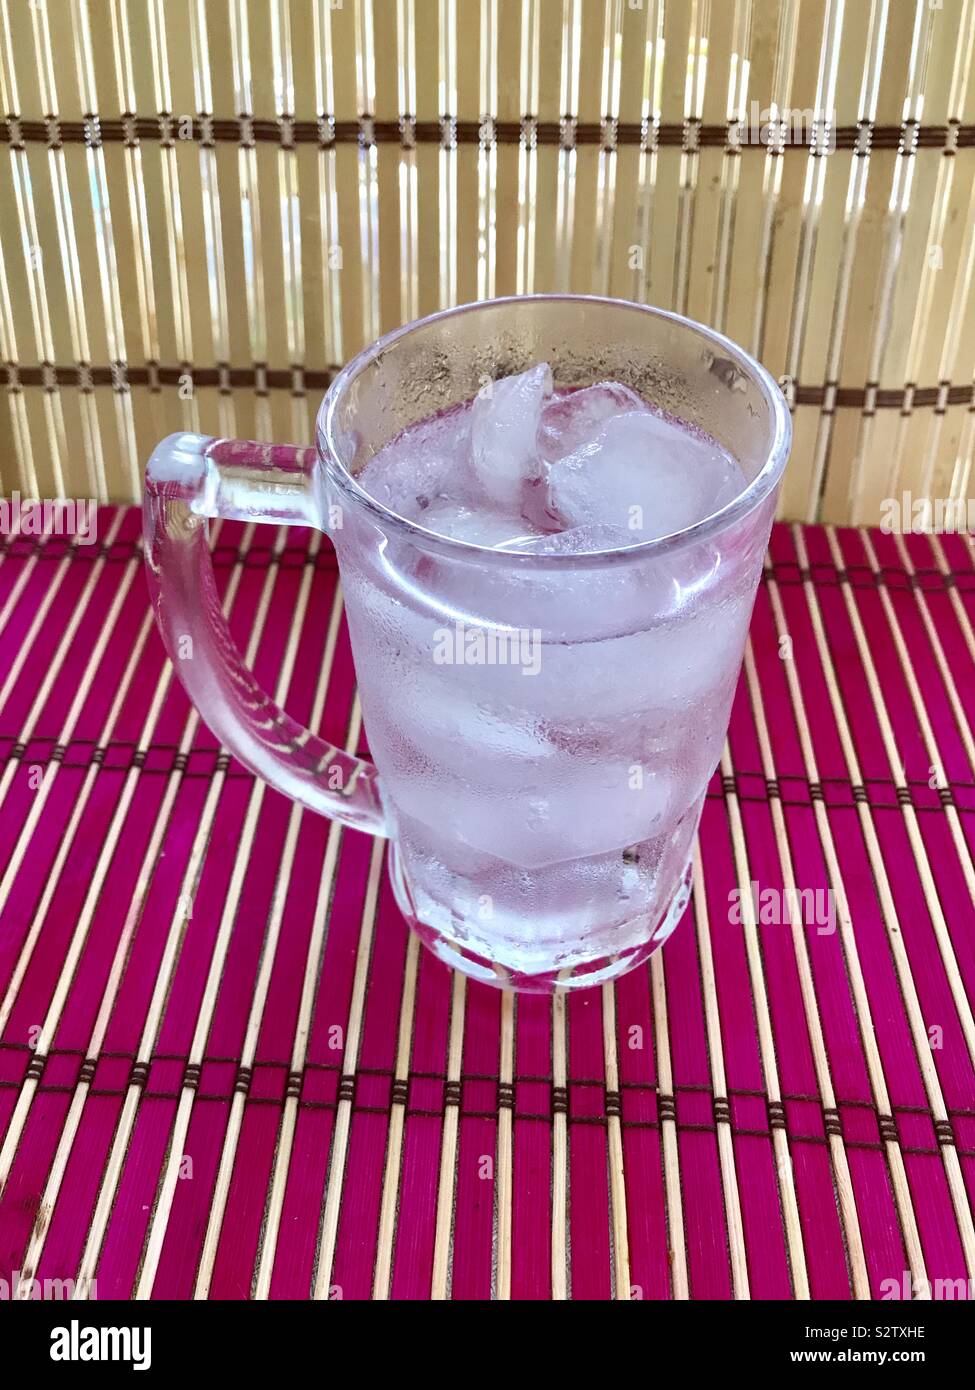 https://c8.alamy.com/comp/S2TXHE/a-glass-of-cold-water-with-ice-placed-on-a-mat-S2TXHE.jpg